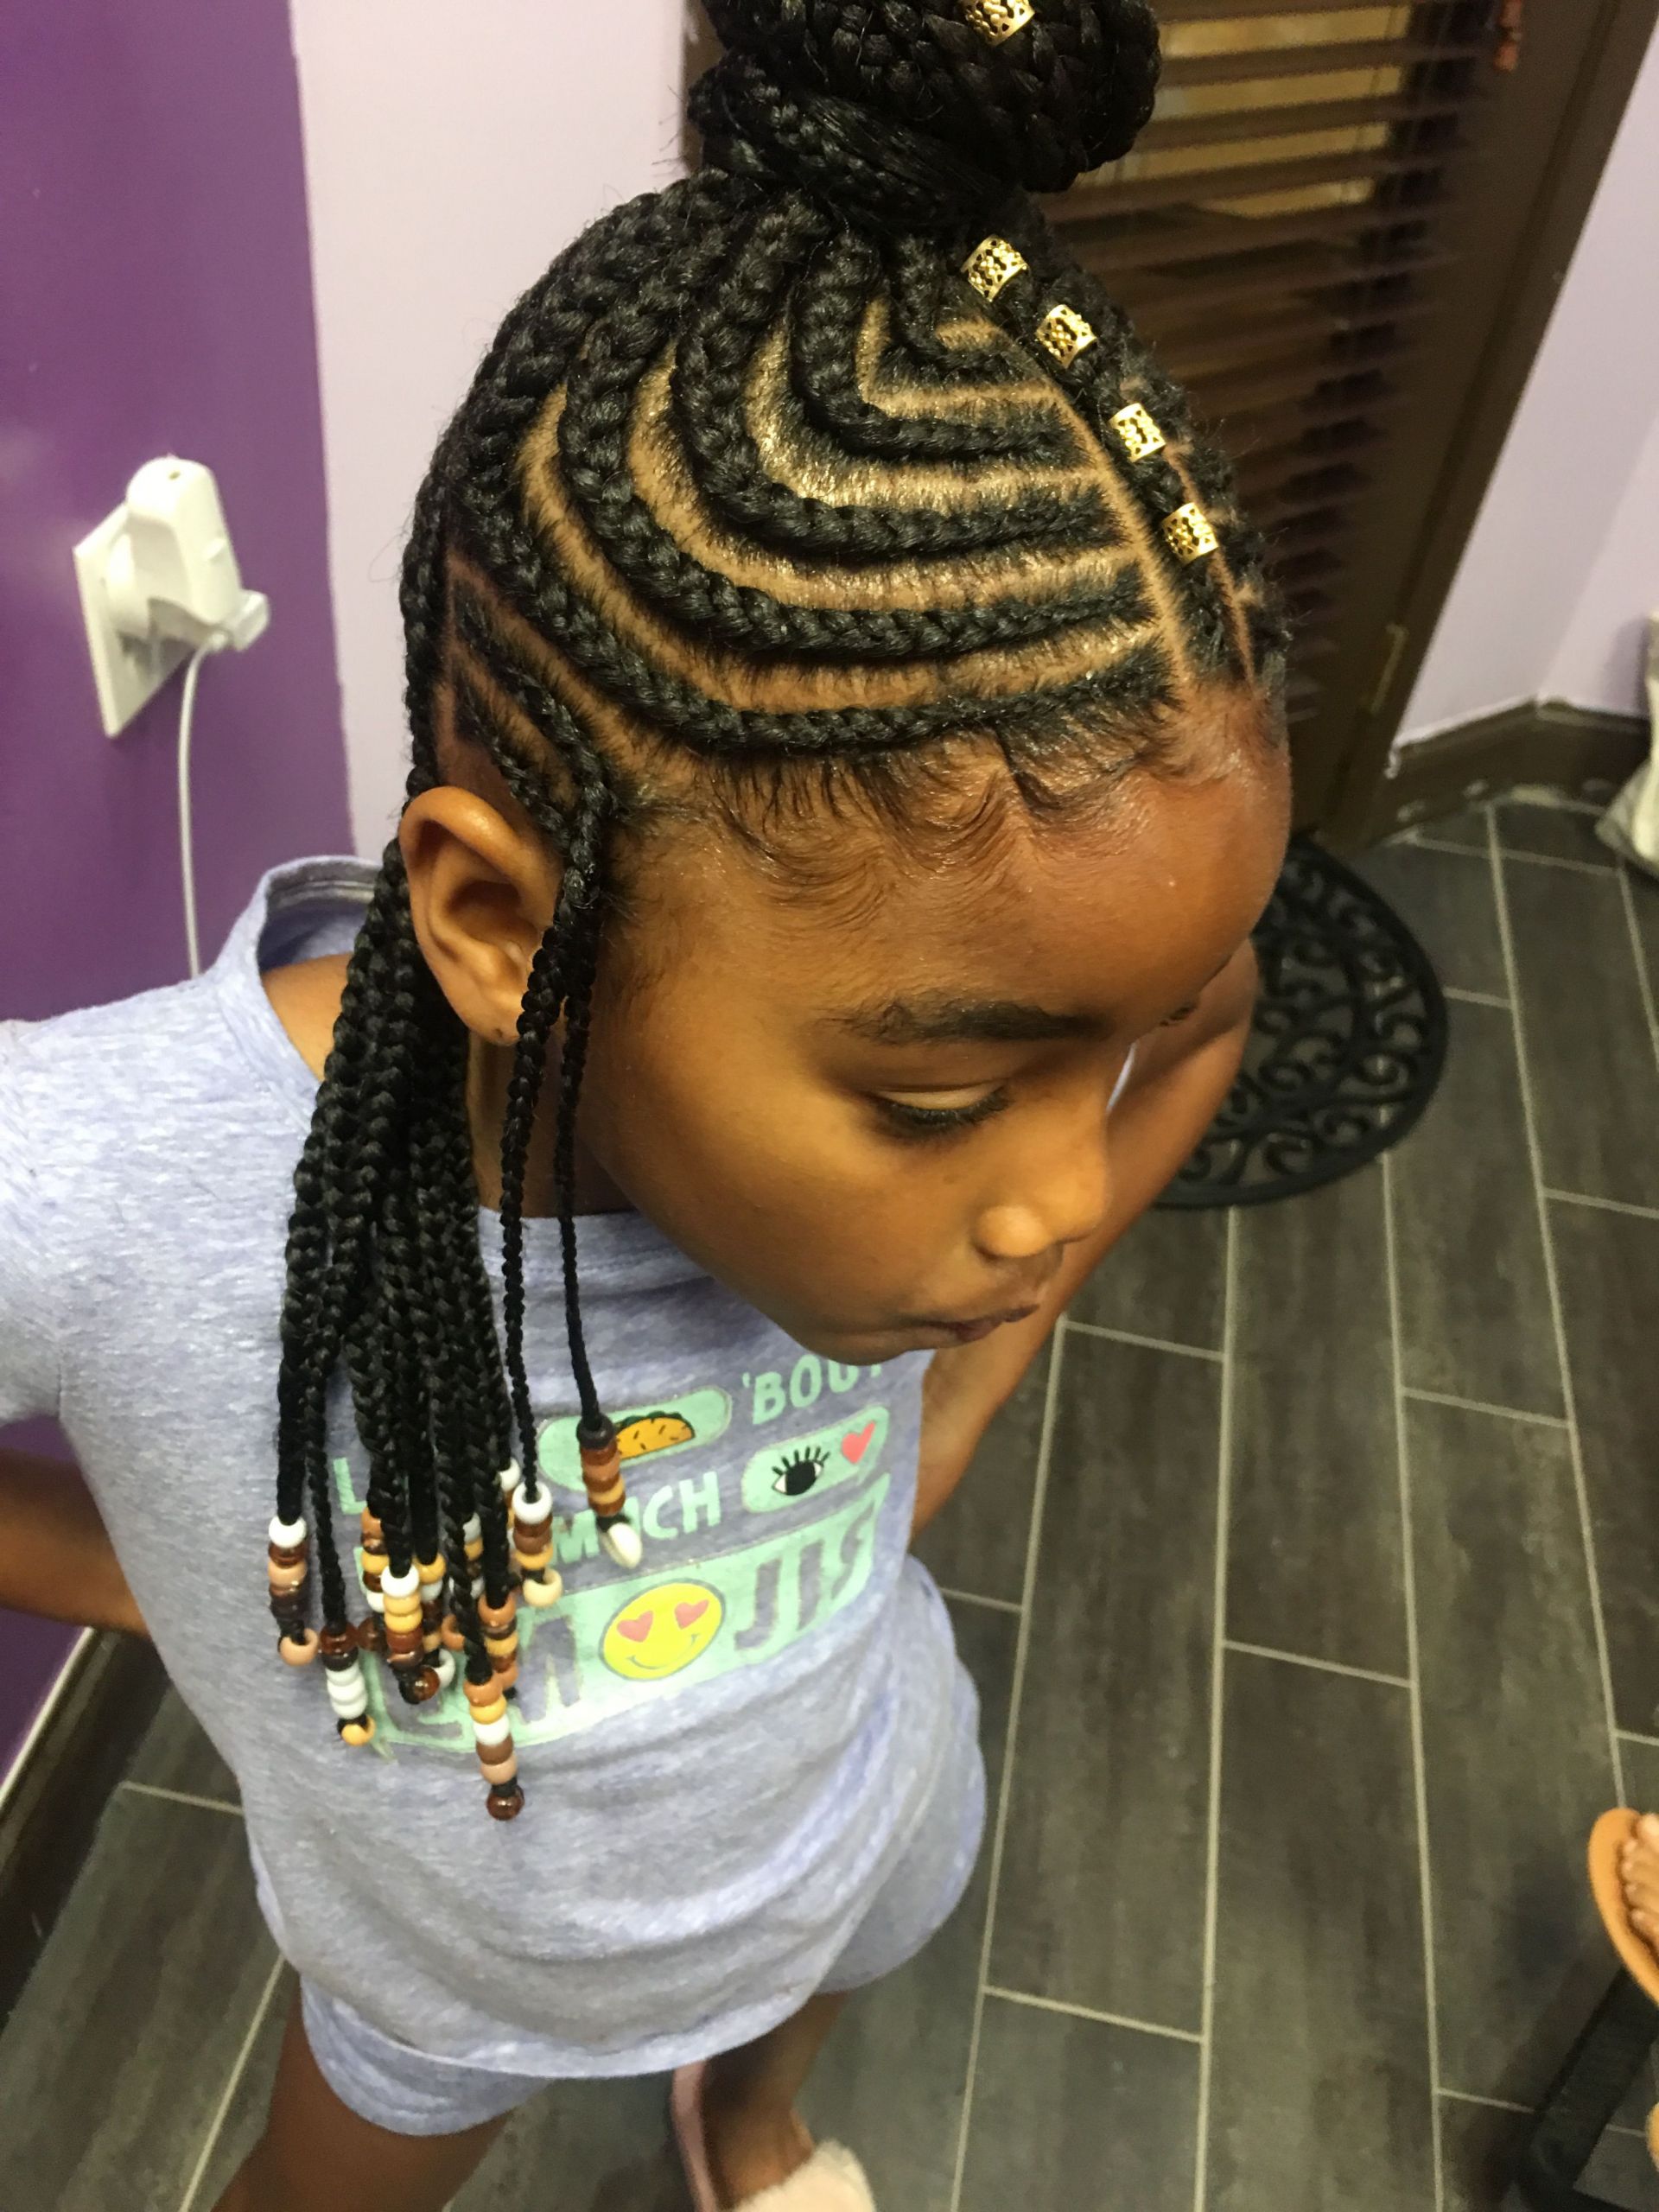 Kids Hair Styles With Braids
 She Used Flat Twists To Create Fabulous Summer Curls